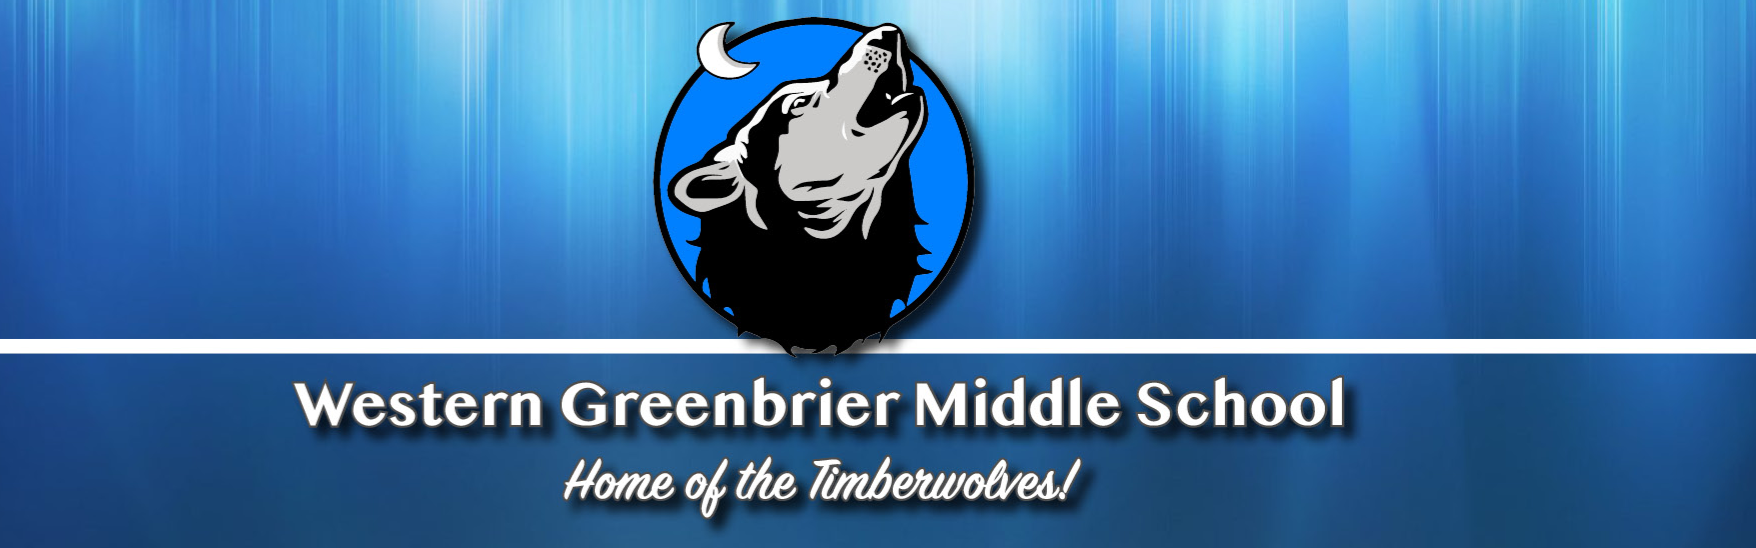 western greenbrier middle